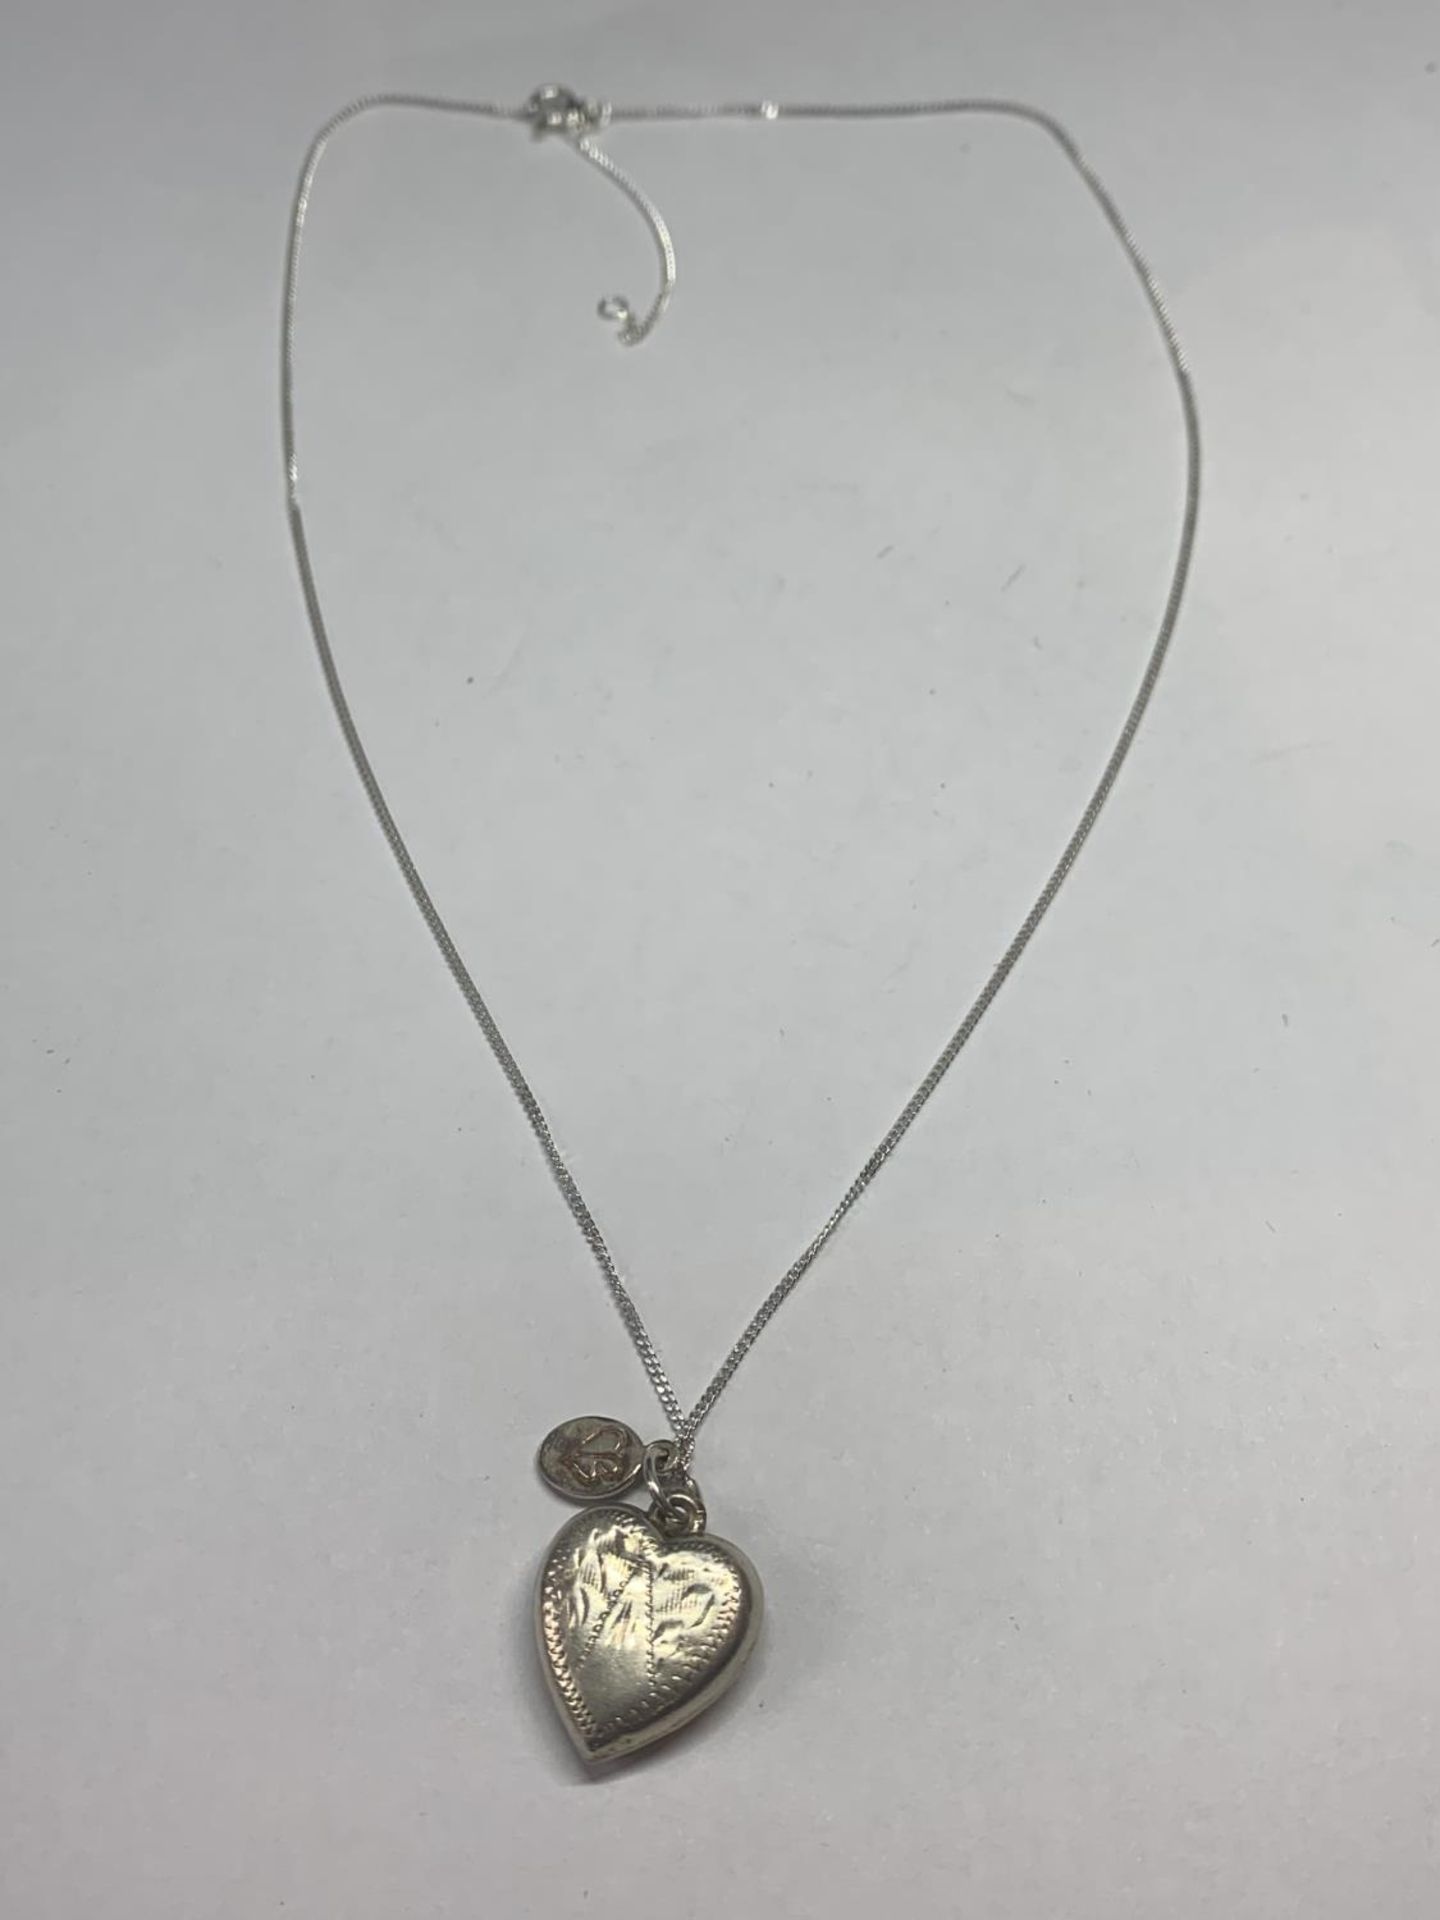 A MARKED 925 SILVER HEART PENDANT AND CHAIN IN A PRESENTATION BOX - Image 2 of 5